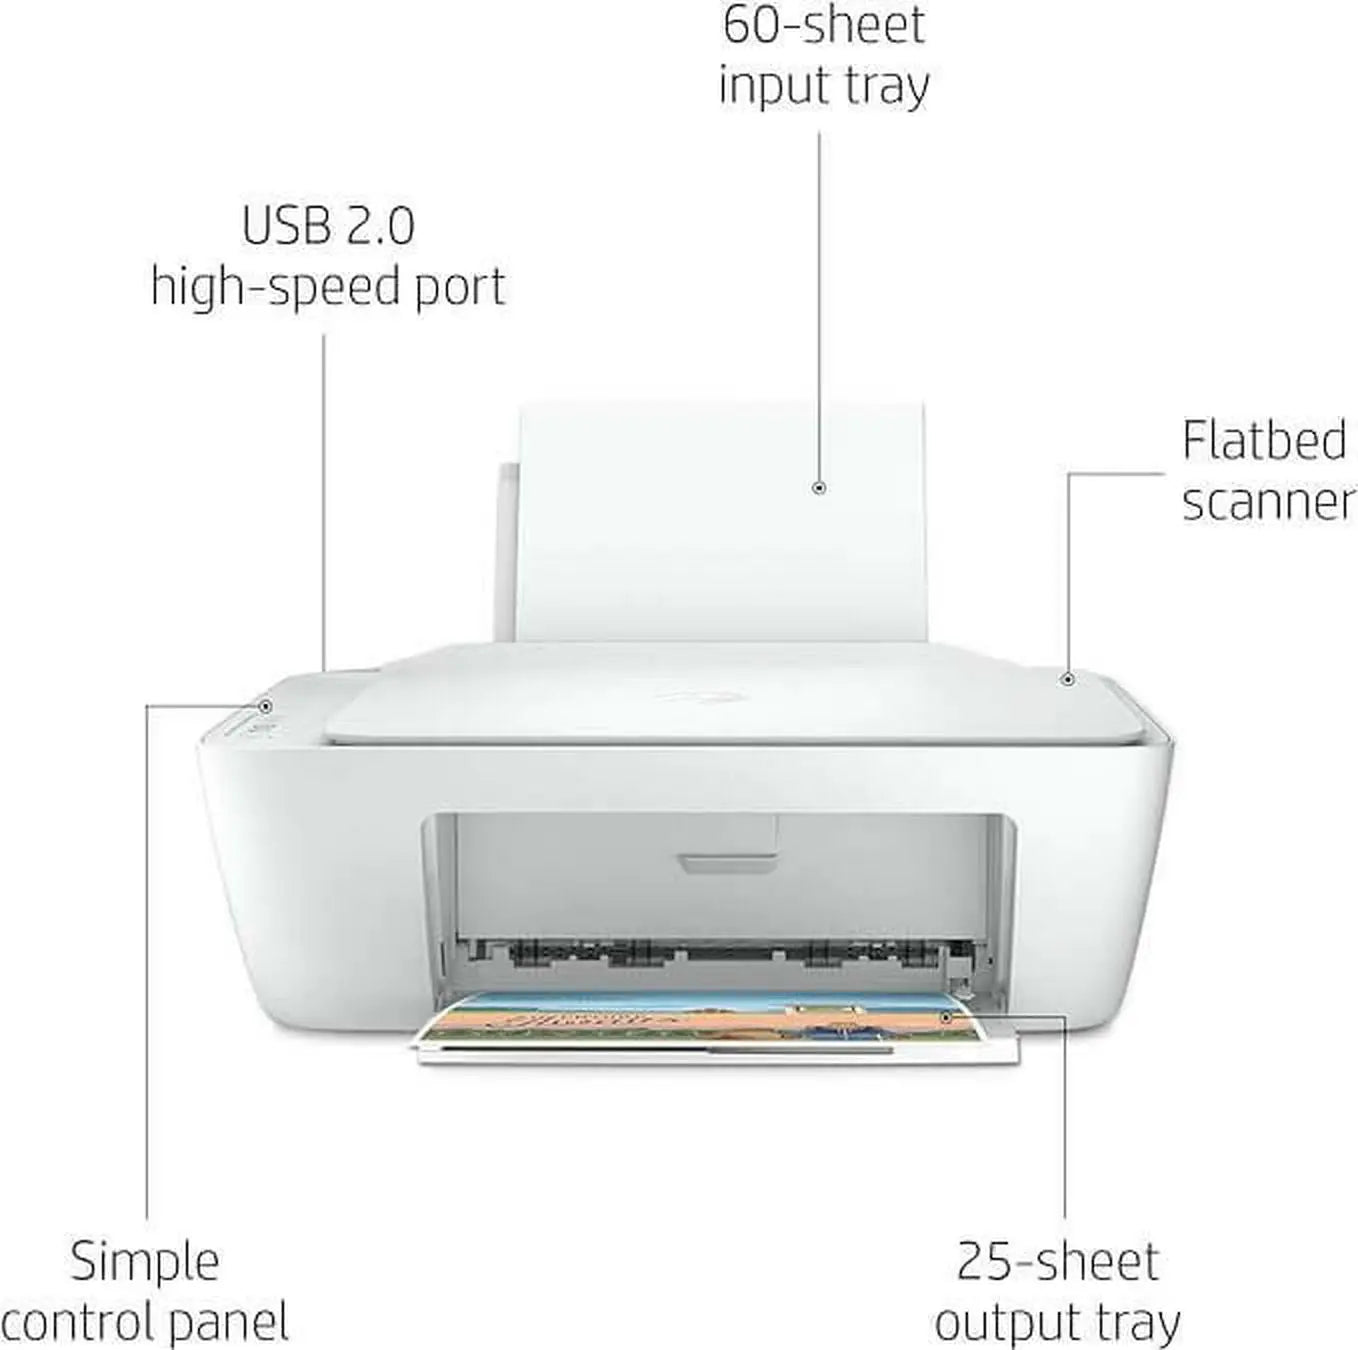 Hp Deskjet 2320 All-In-One Printer, USb Plug And Print, Scan, And Copy - White